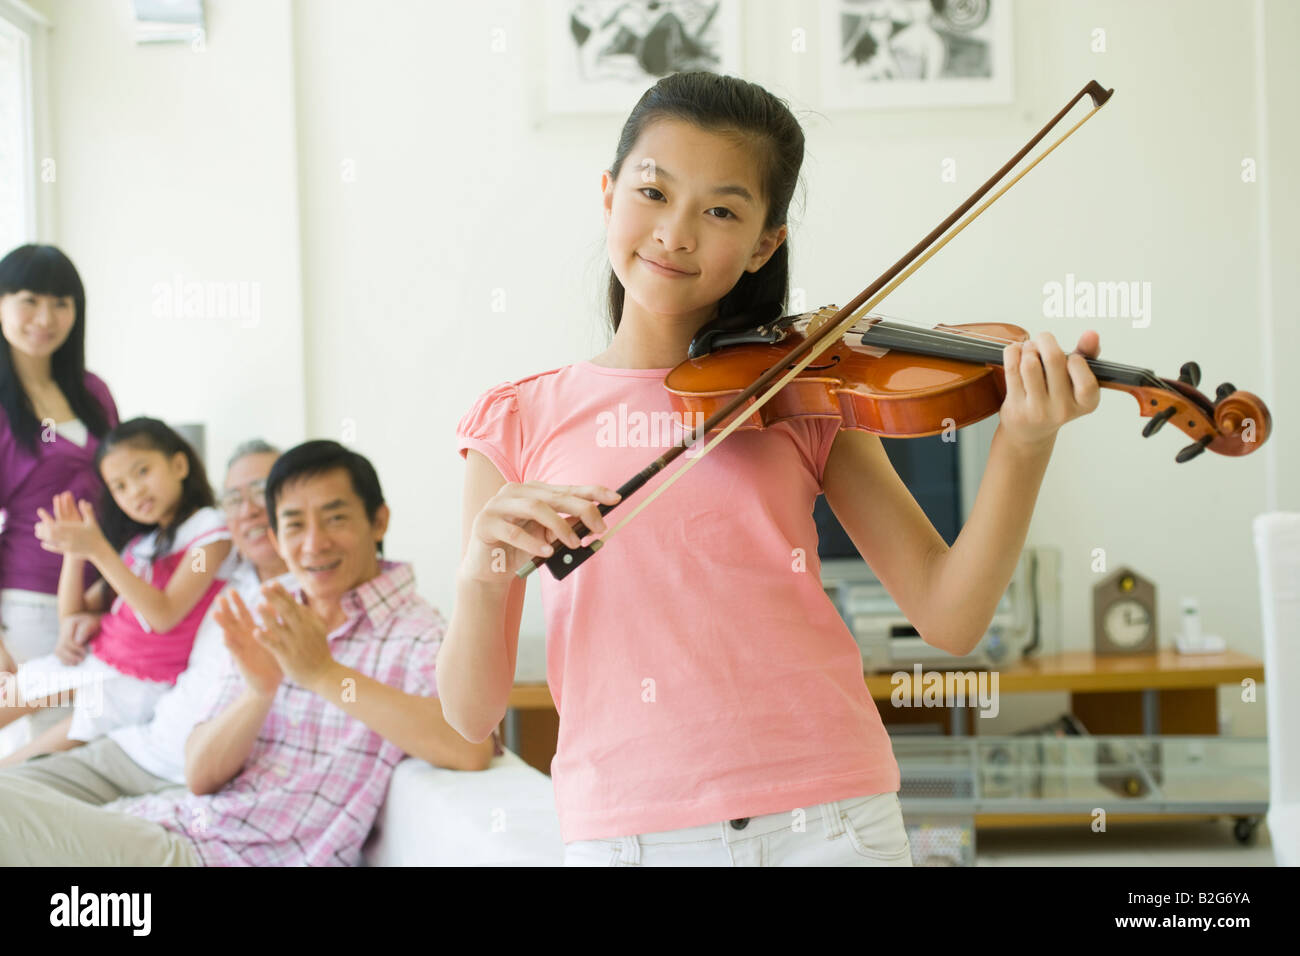 Girl playing a violin with her family applauding in the background Stock Photo